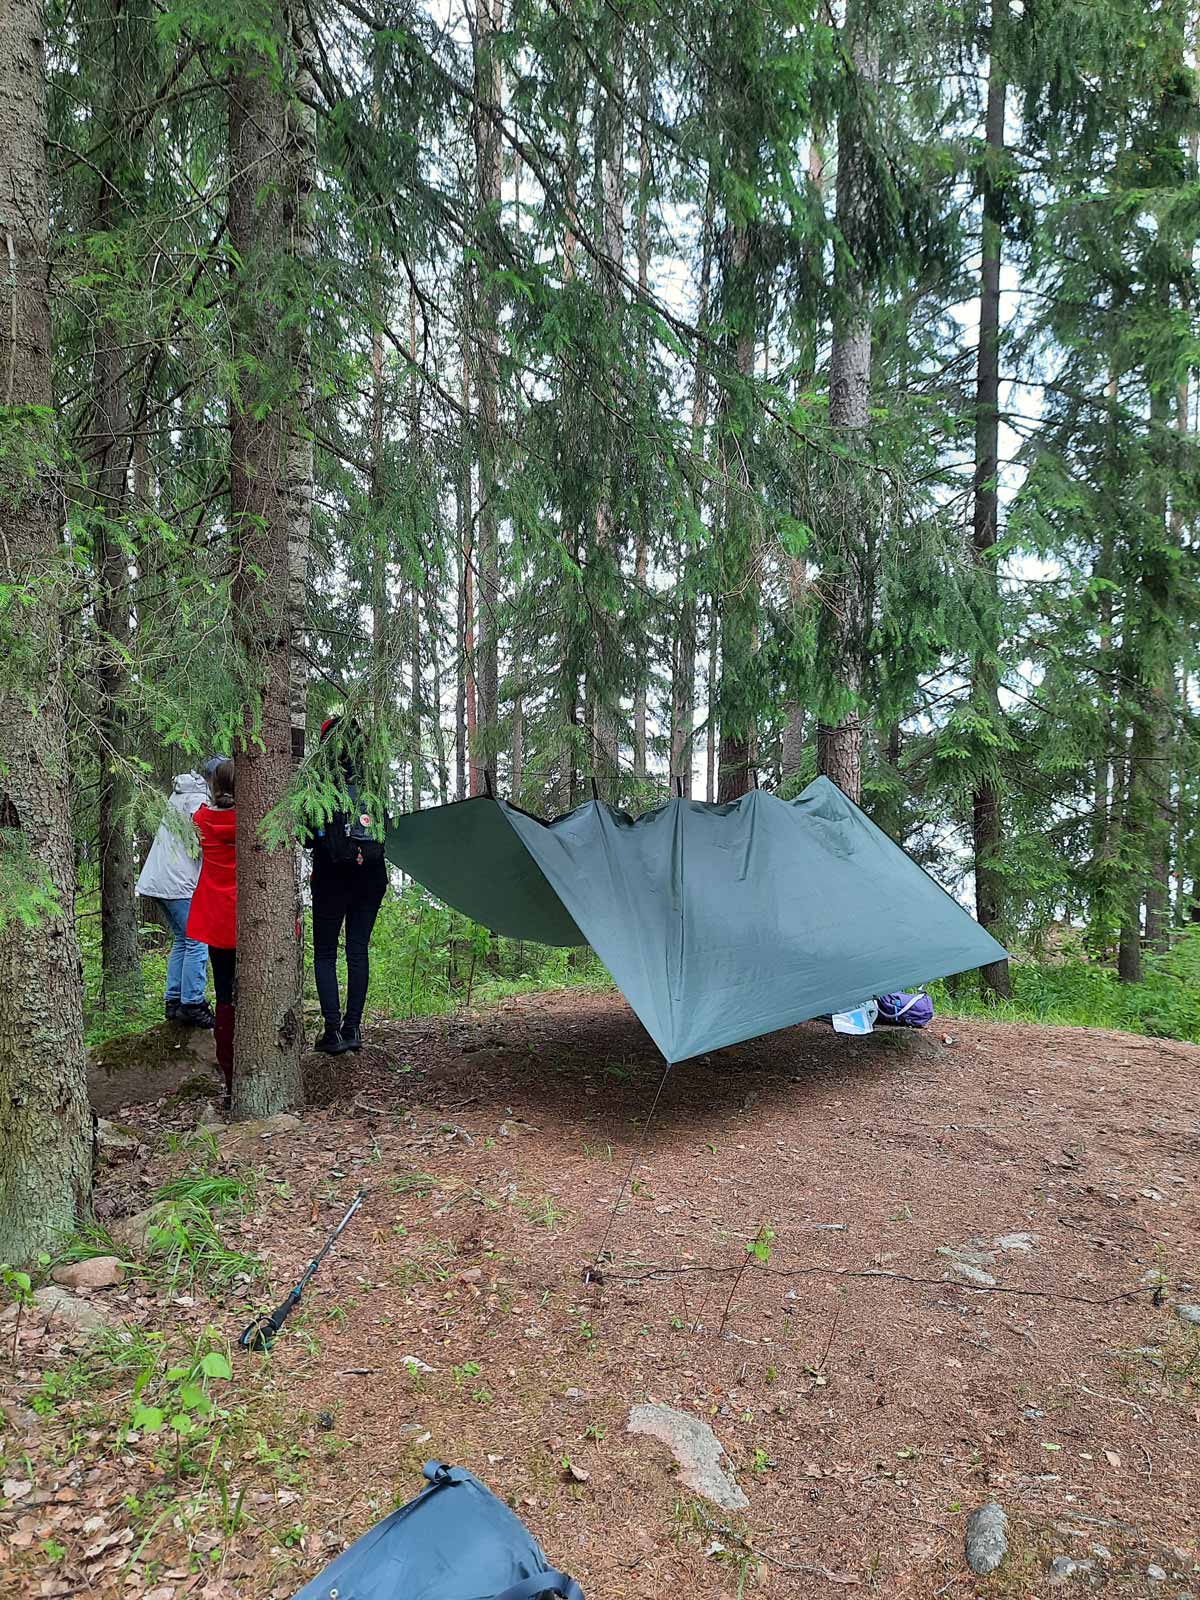 Forest excursion of a day camp for youths at Pinkjärvi in Eurajoki. Photo: Veera Virtanen